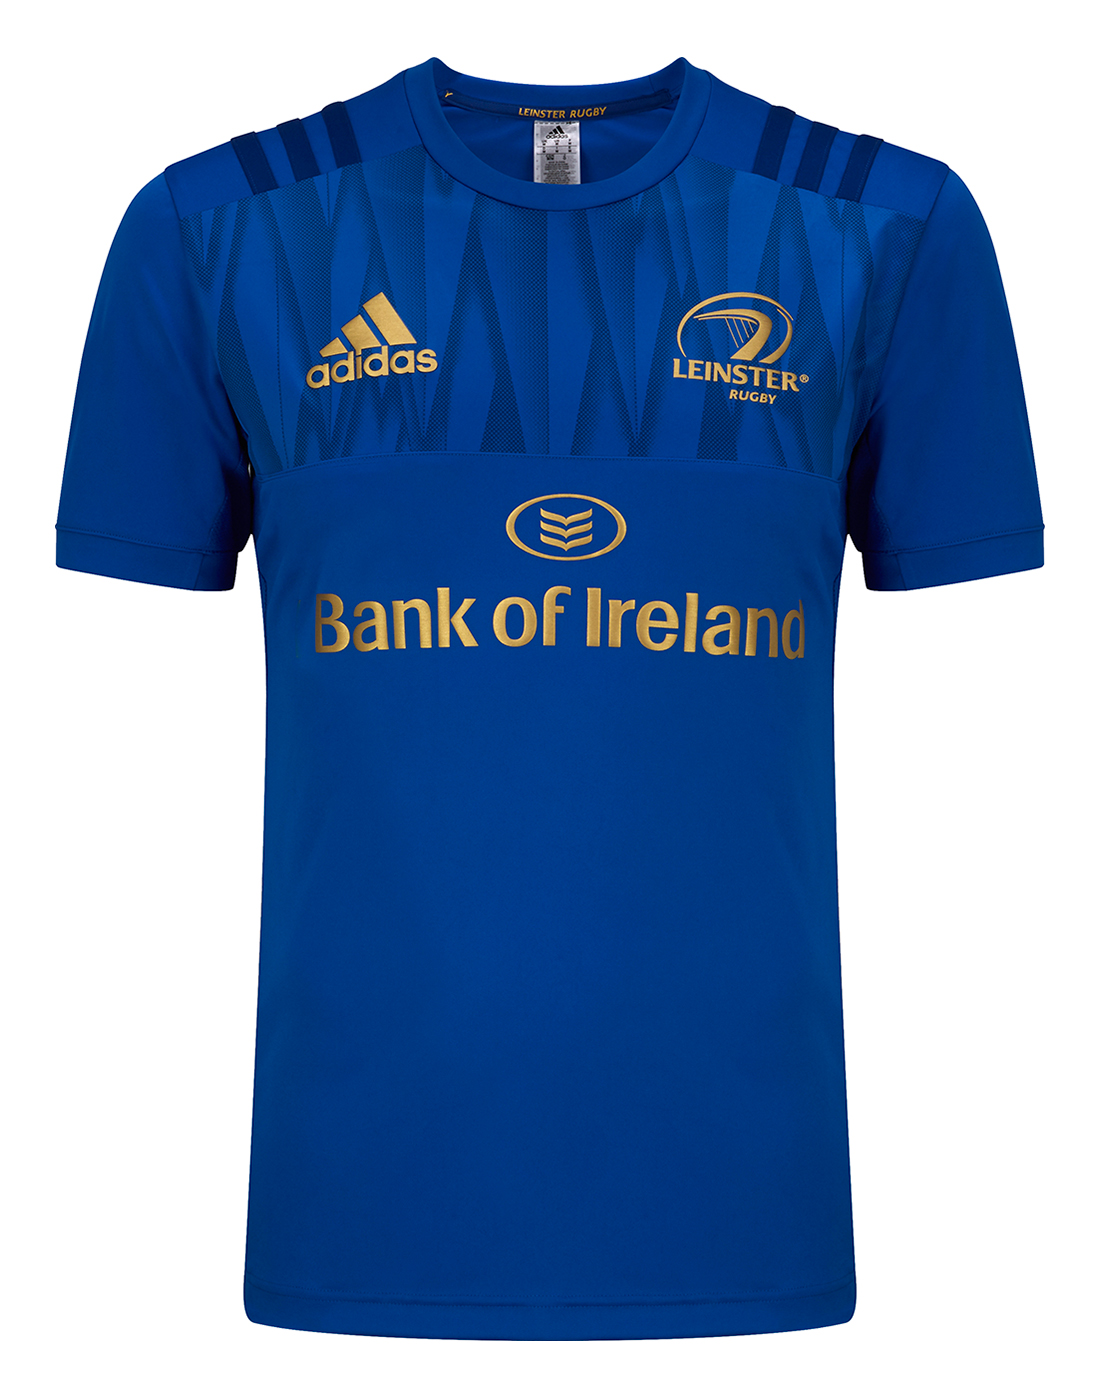 leinster rugby top